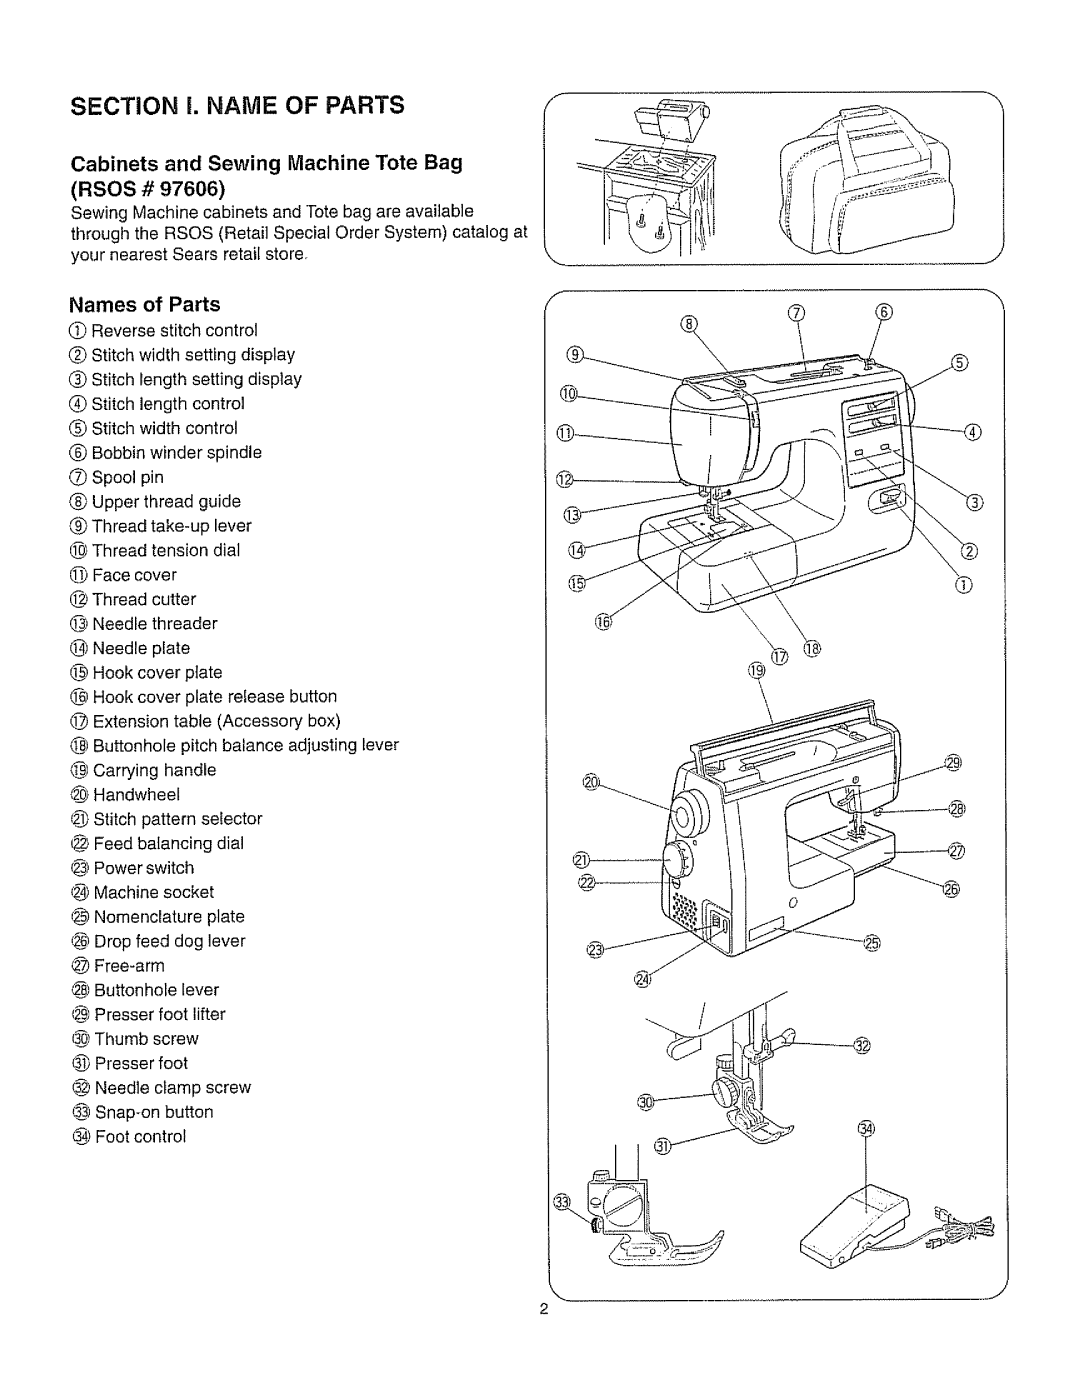 Kenmore 385.162213 Section I. Name Of Parts, @ @ @, Cabinets and Sewing Machine Tote Bag RSOS #, Names of Parts 